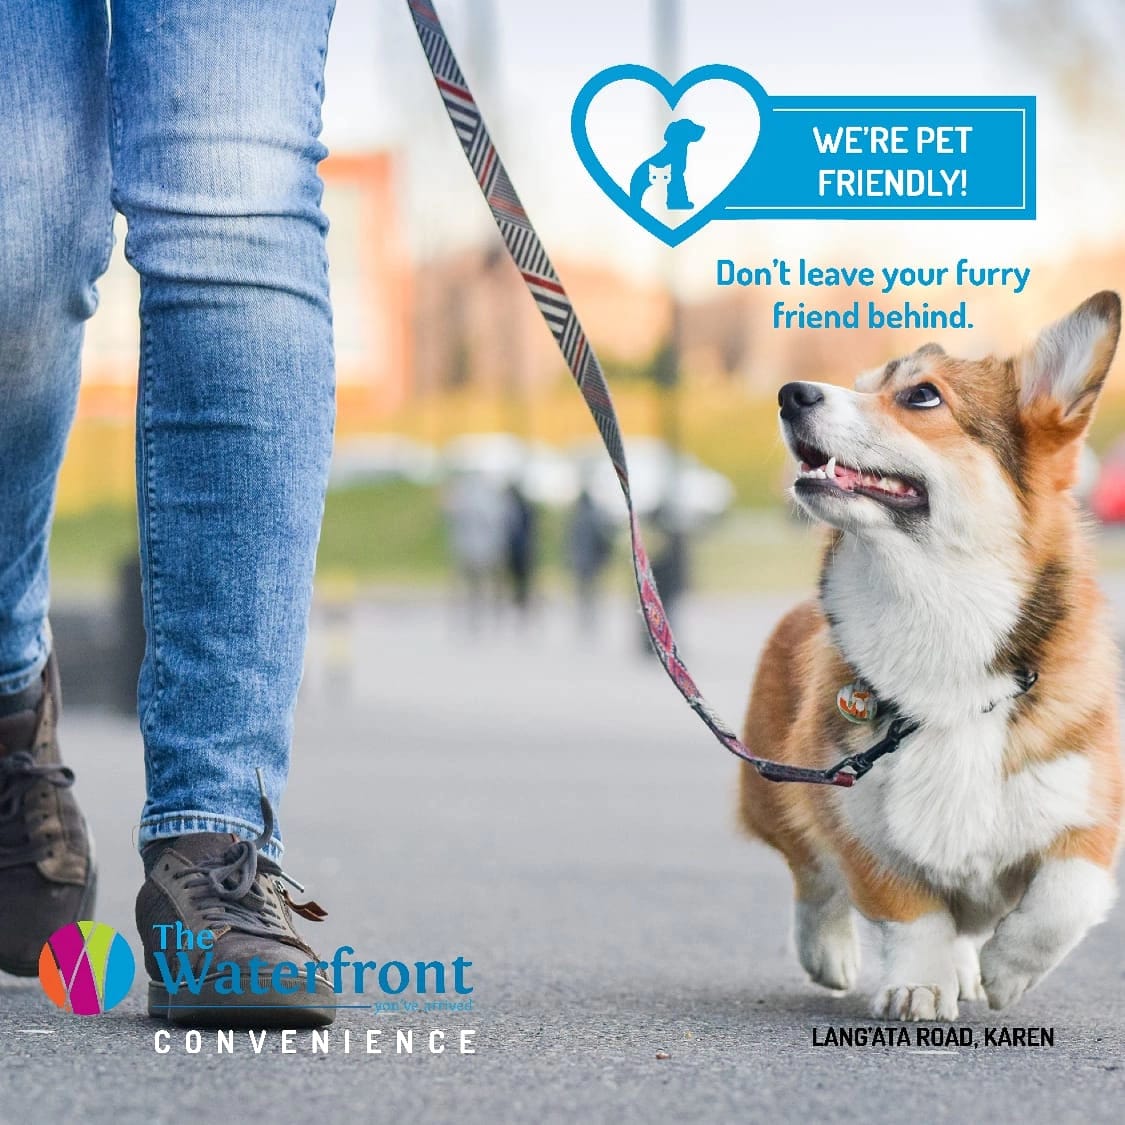 Happy Sunday! Don't forget to bring your furry friends along-we love pets, so they're welcome too! #PetFriendlyNairobi #Petlovers #Pawfriends #PetFriendlyMall #WaterfrontConvenience #TWFKaren #YouveArrived